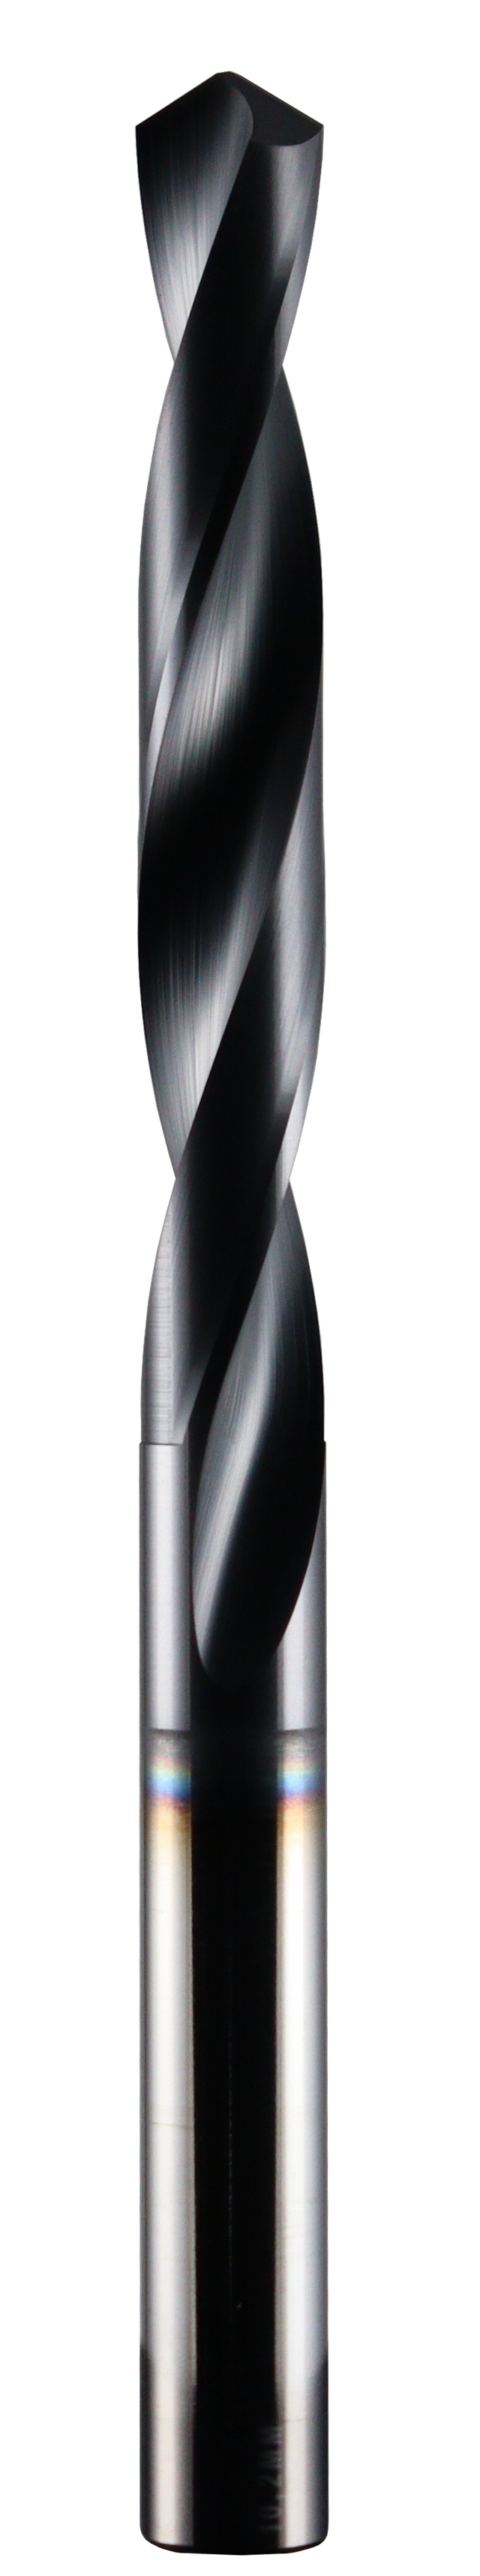 Letter J, 118 Degree Point, Solid Carbide Drill - 57182